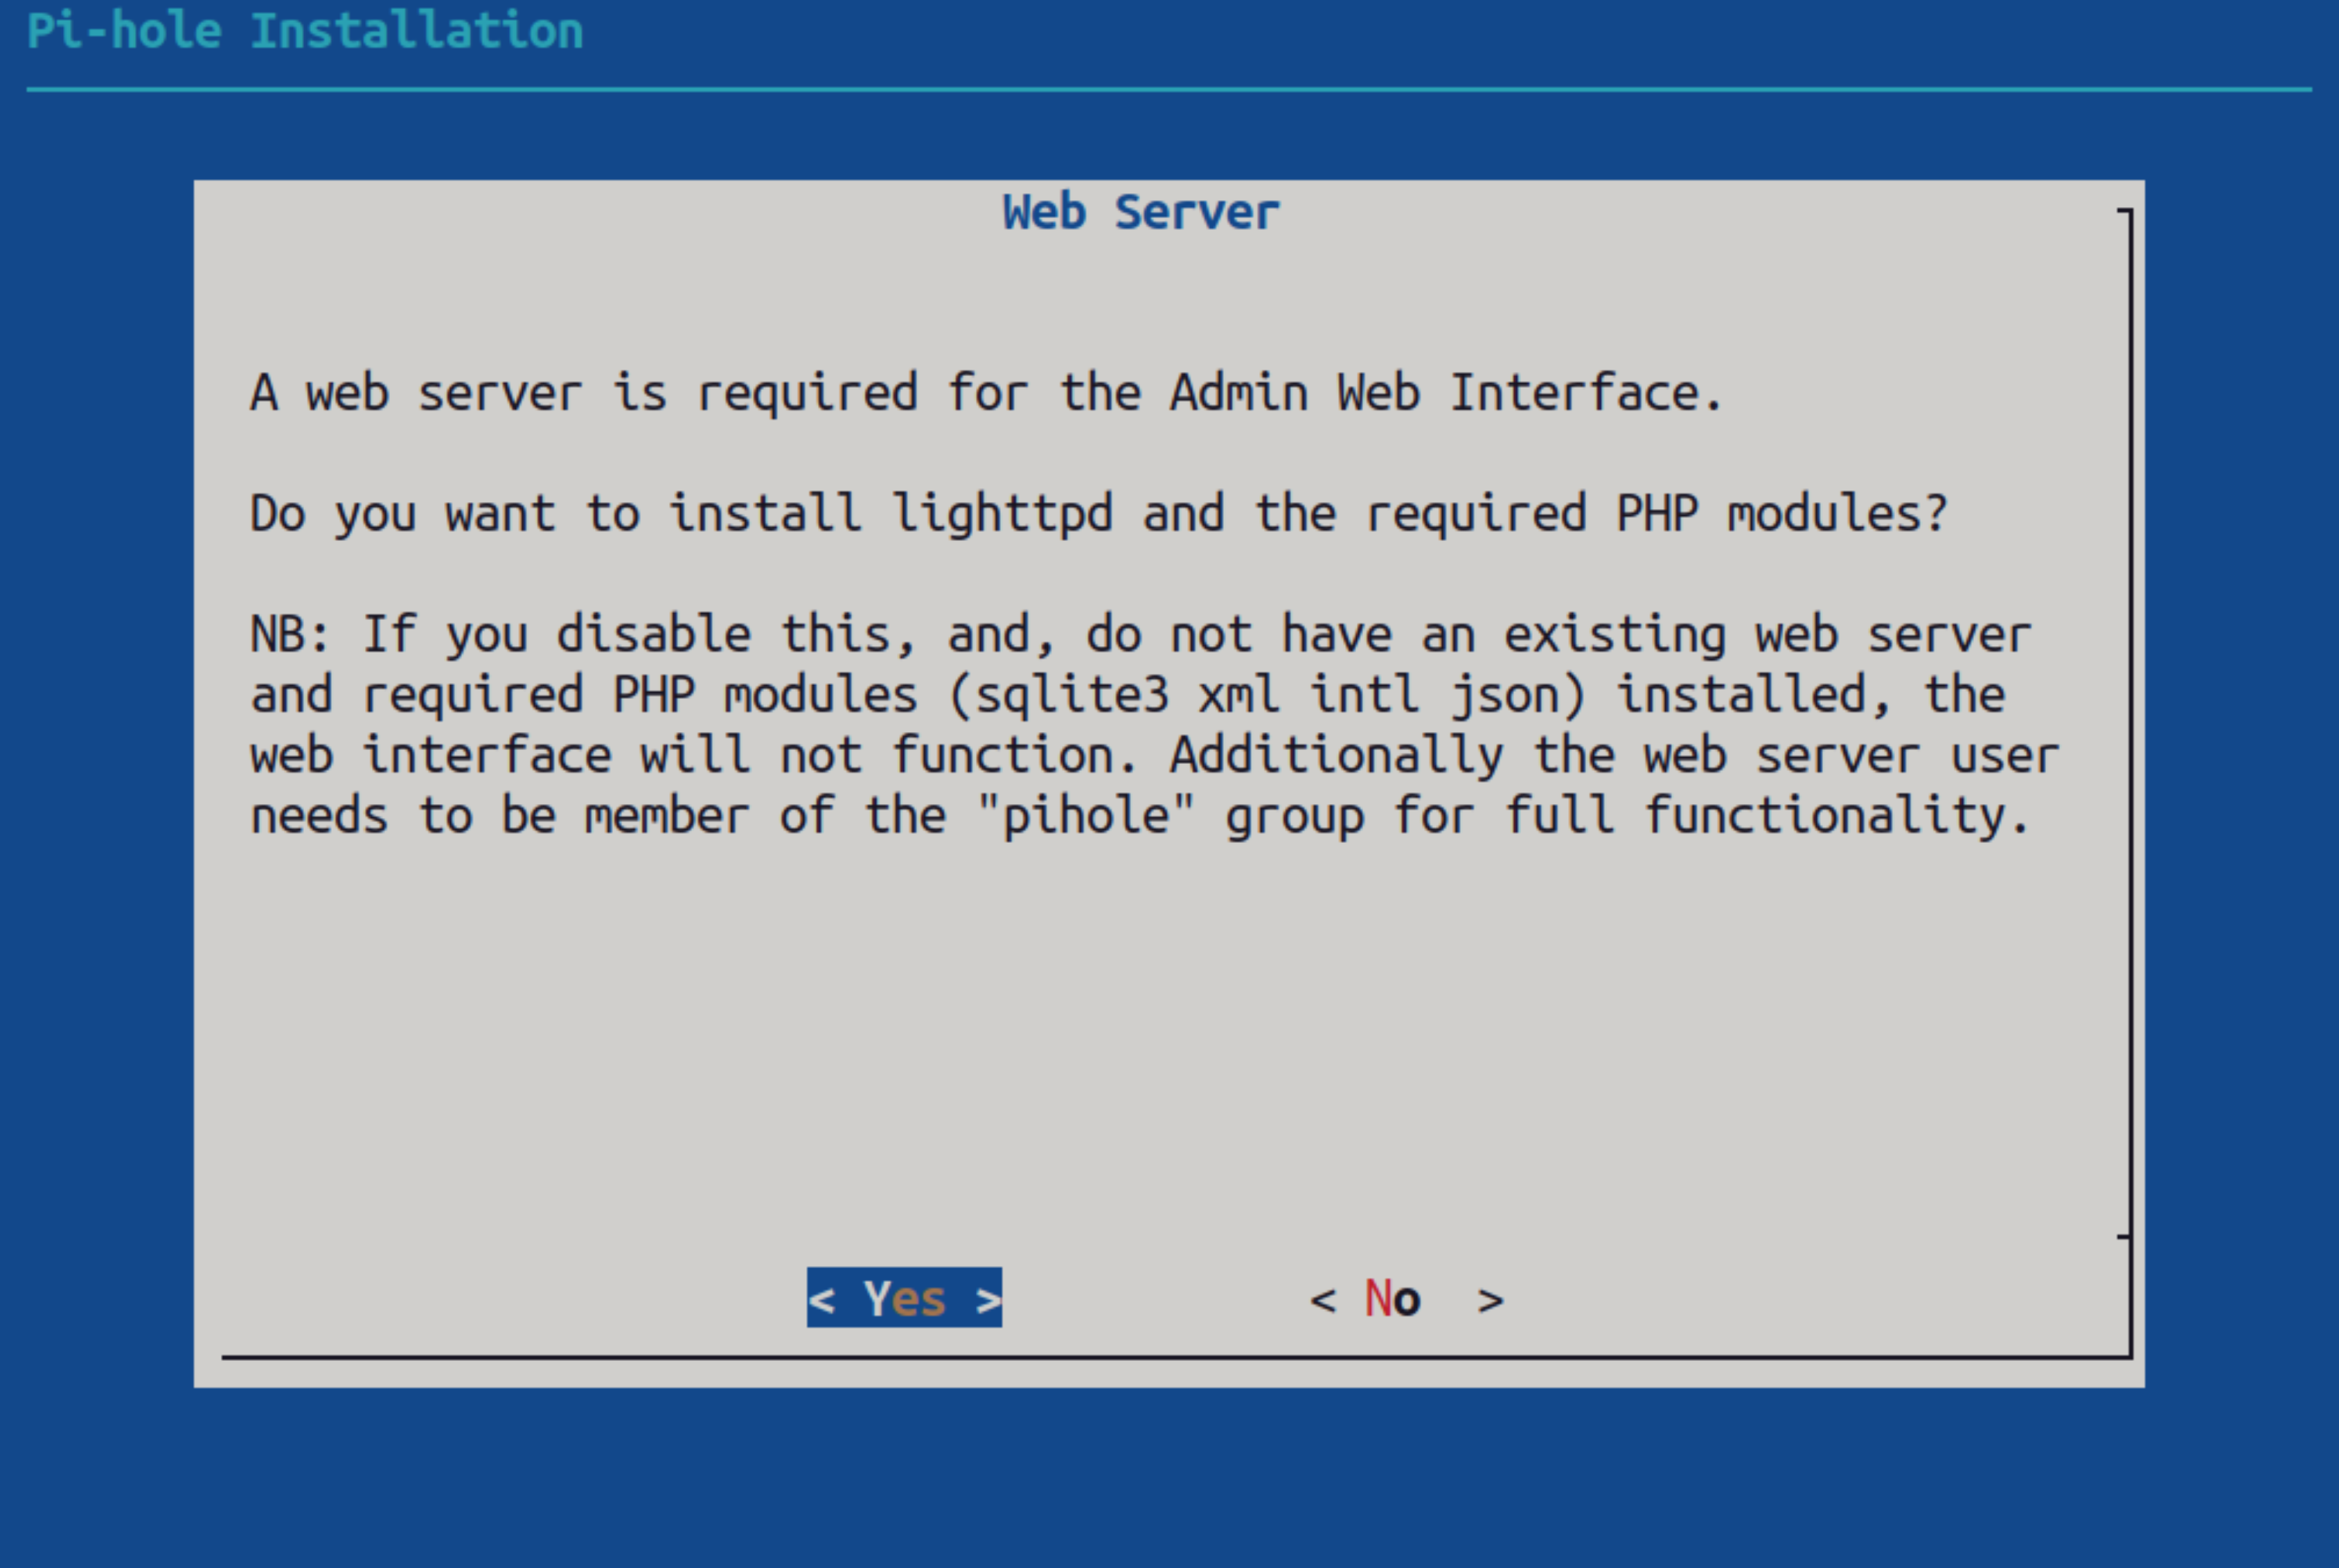 Should the Pi-hole installer install 'lighttpd' web server or does the user already have a web server?